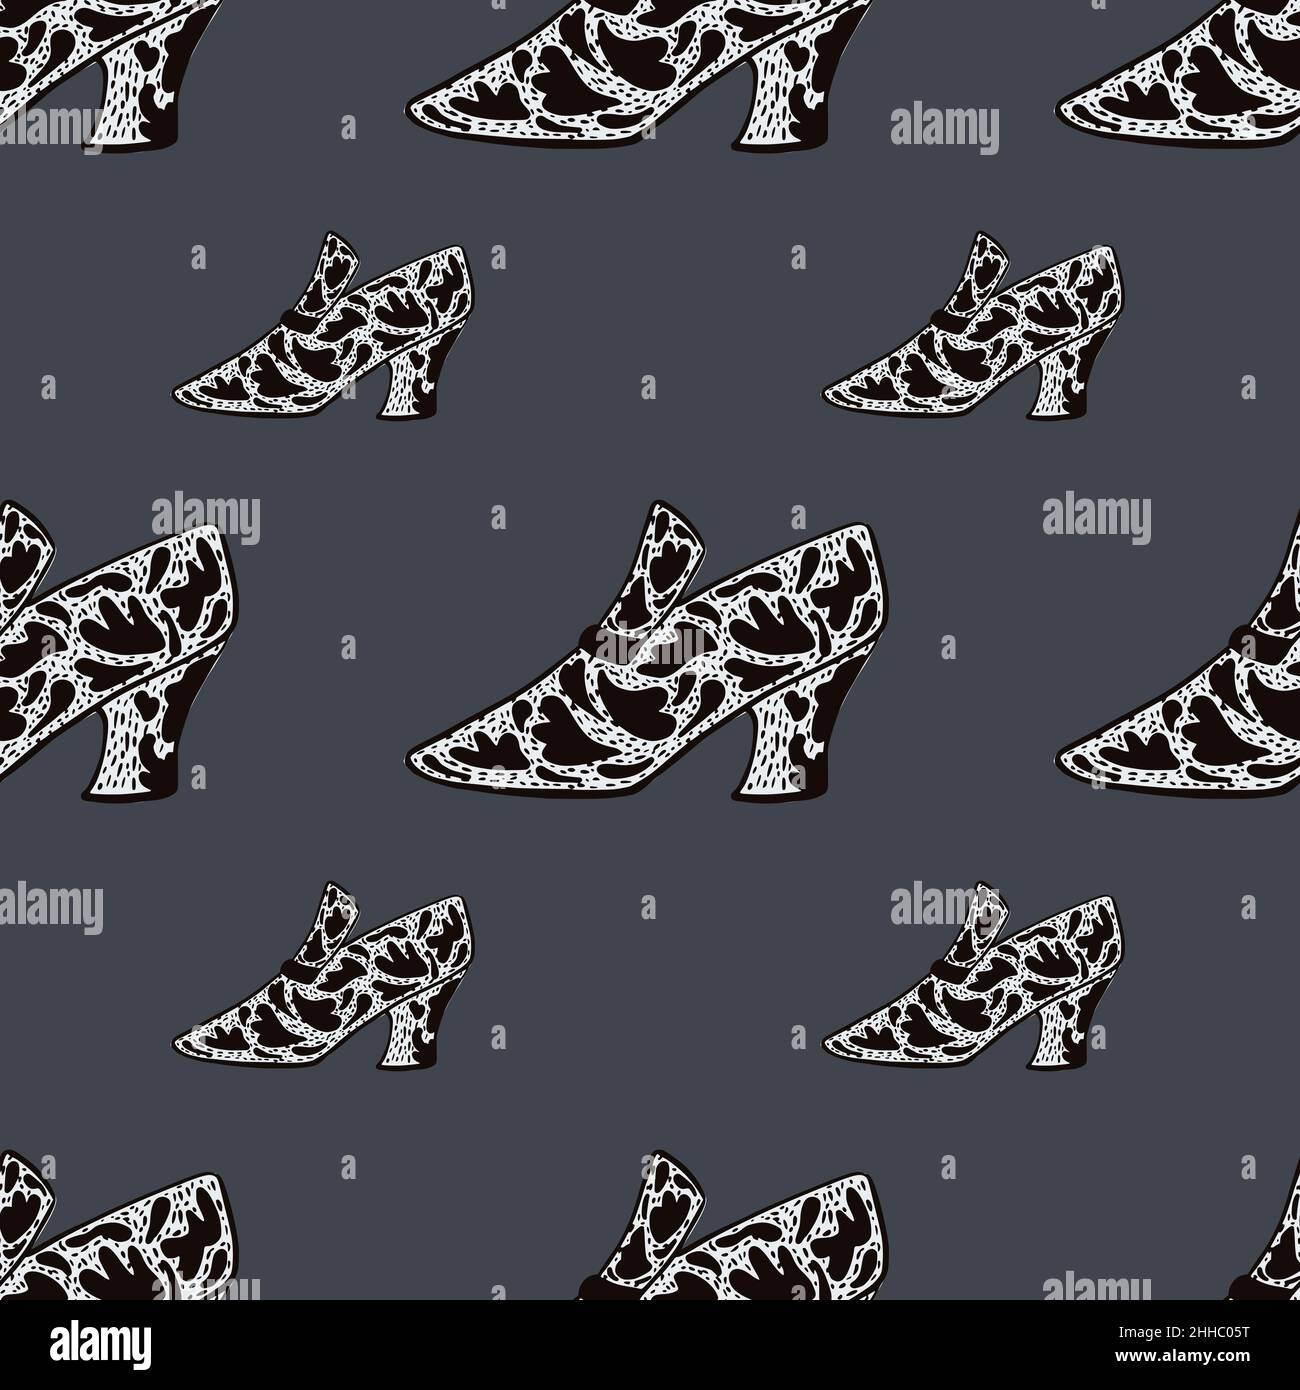 Seamless fashion pattern with womes shoes with black ornament print. Grey background. Vector illustration for seasonal textile prints, fabric, banners Stock Vector